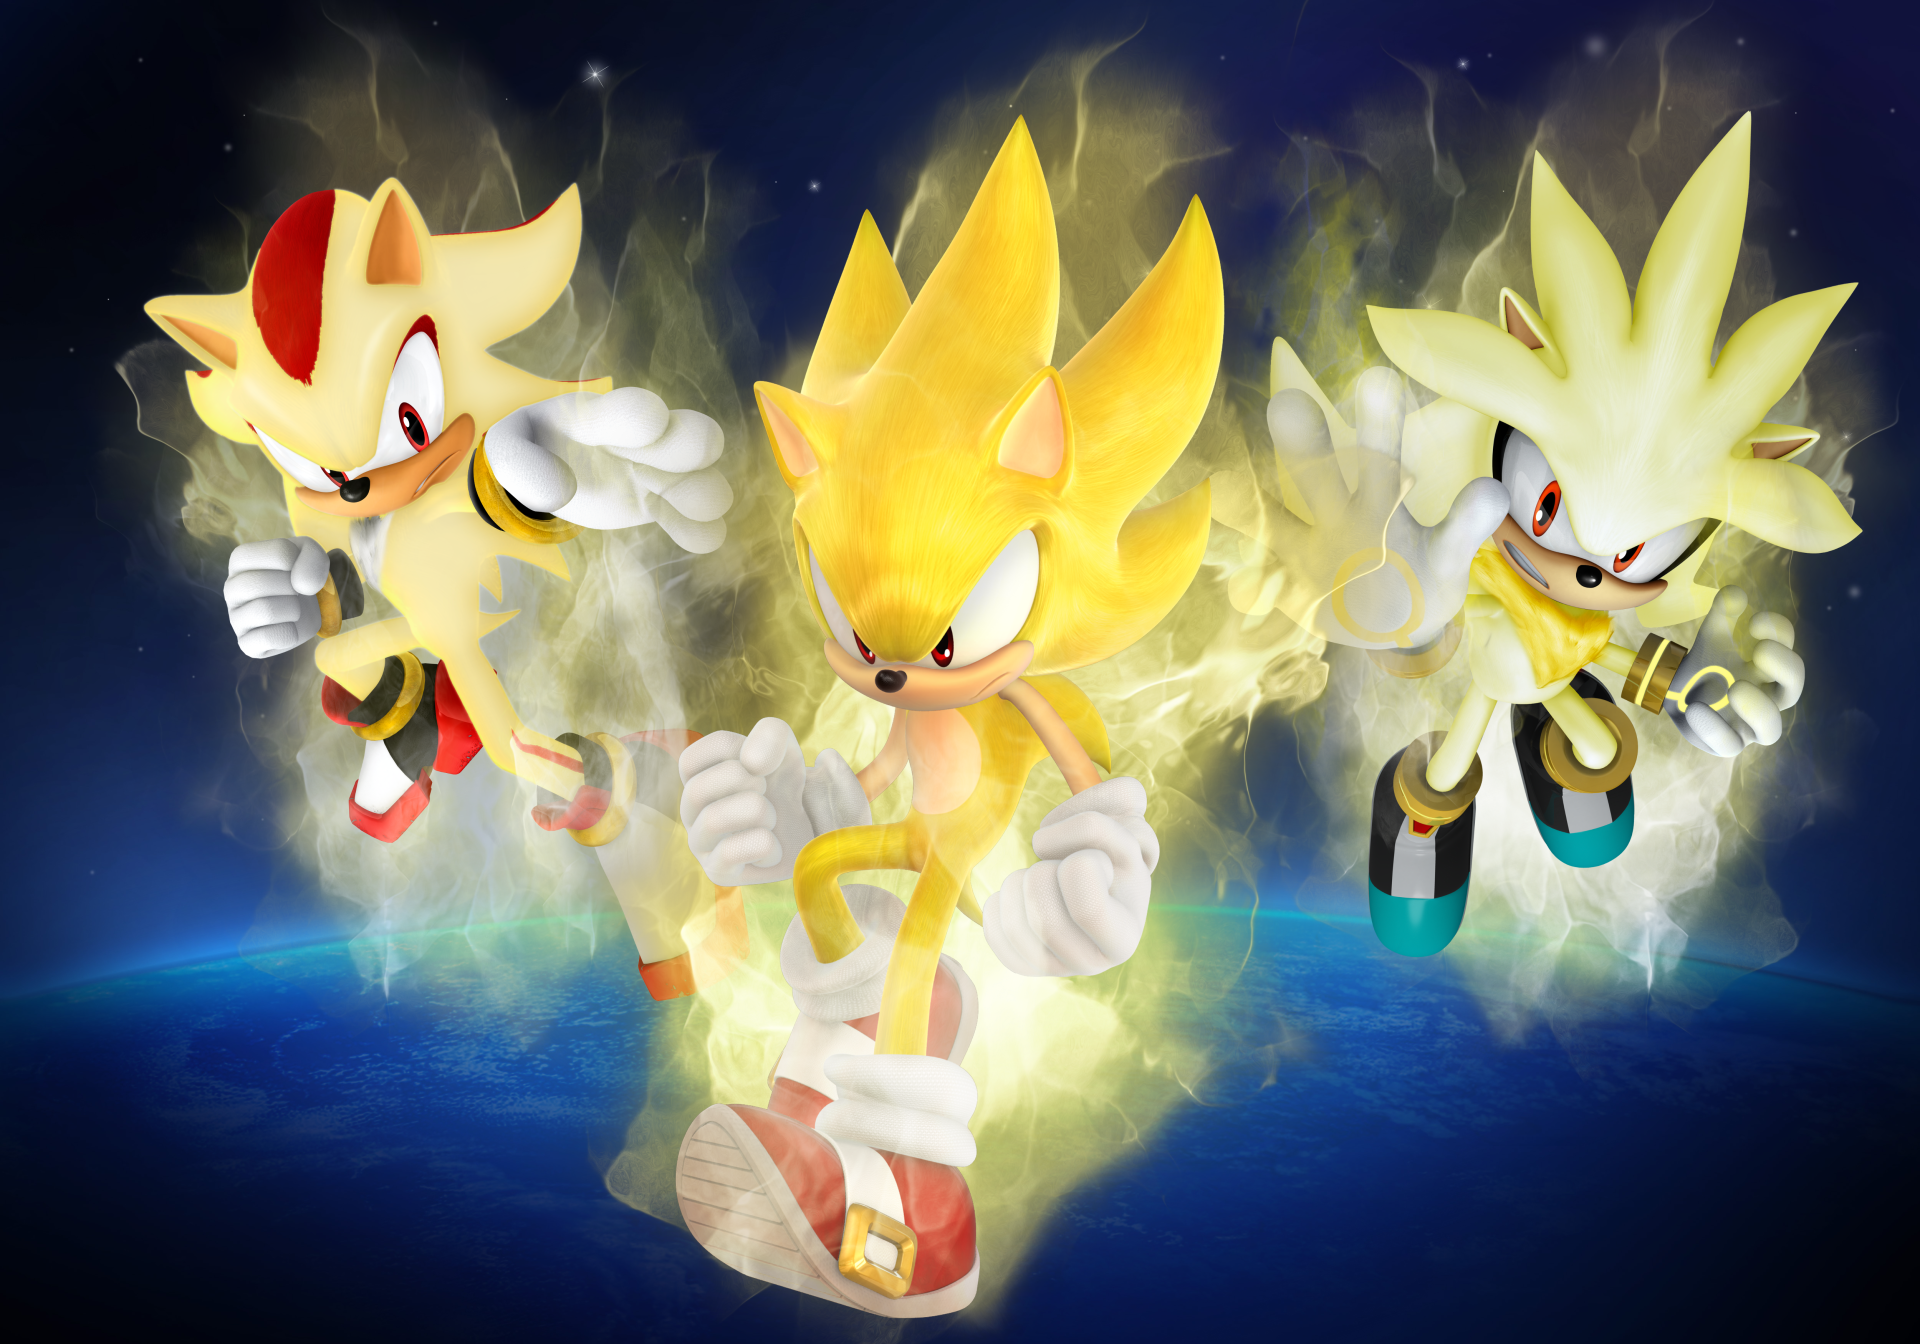 Super Sonic  Cool wallpapers cartoon, Sonic and shadow, Sonic